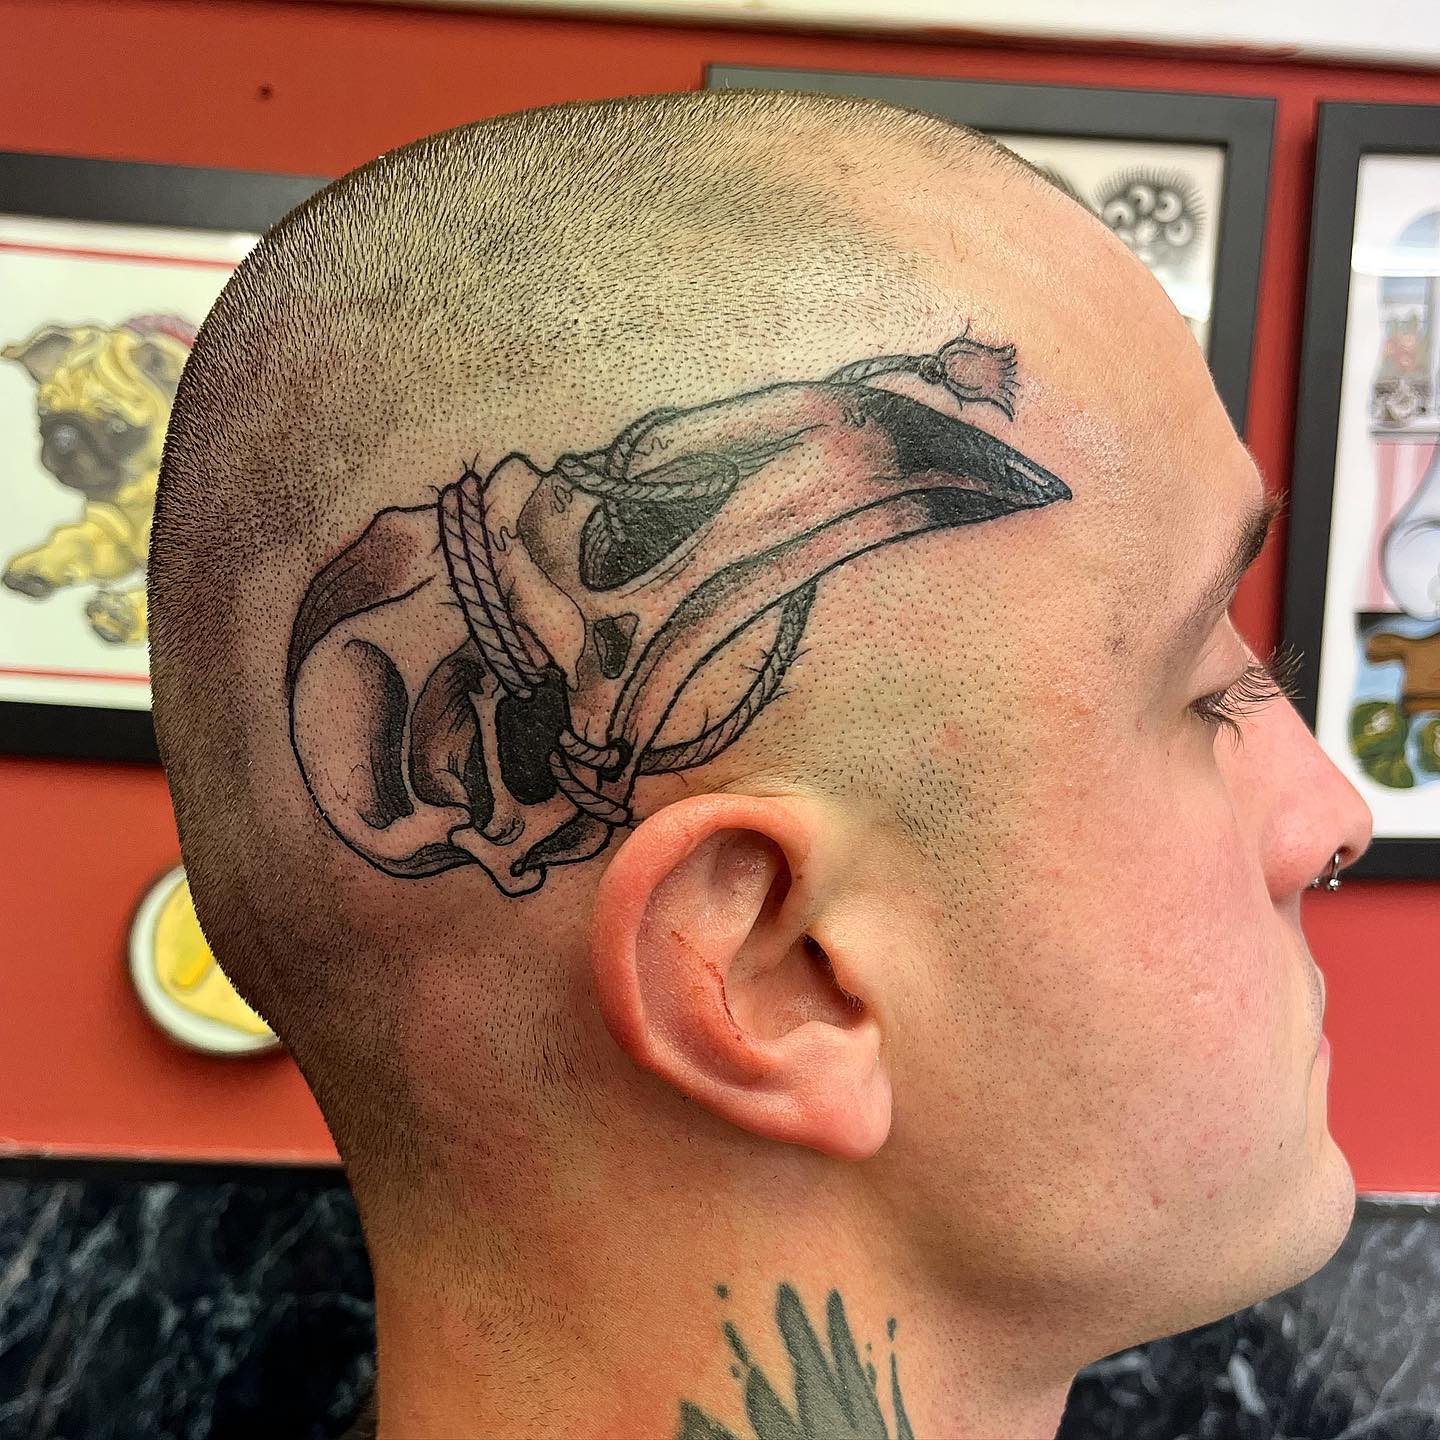 Crow skull for Ethan, one of two done that day! Thank you for sitting so well. I hope it settled in nice easy and quick. 

                   